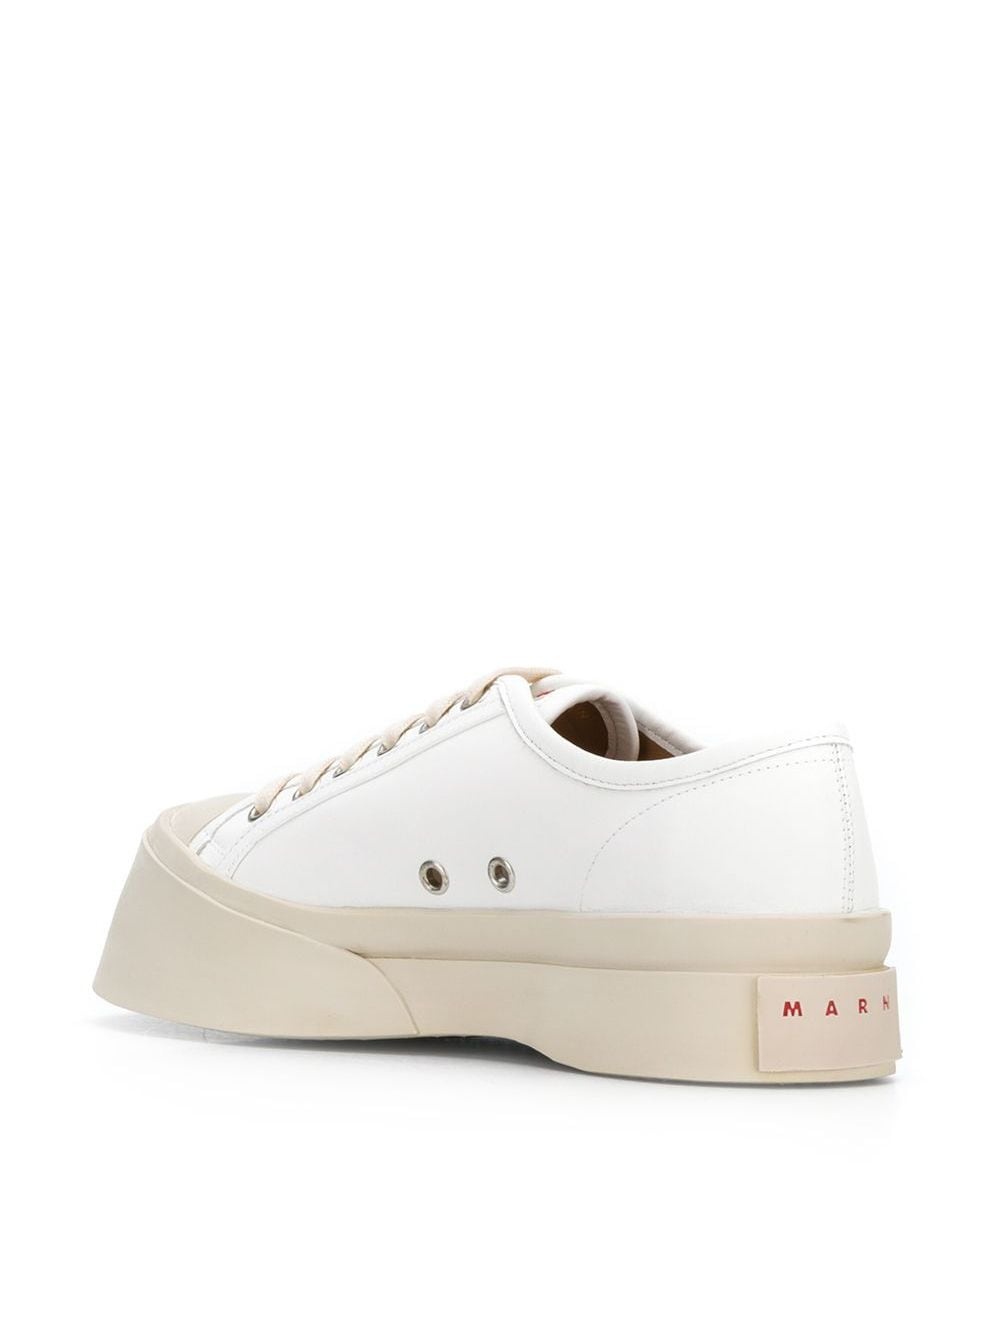 MARNI Women Laced Up Pablo Smooth Calf Leather Sneaker - 4